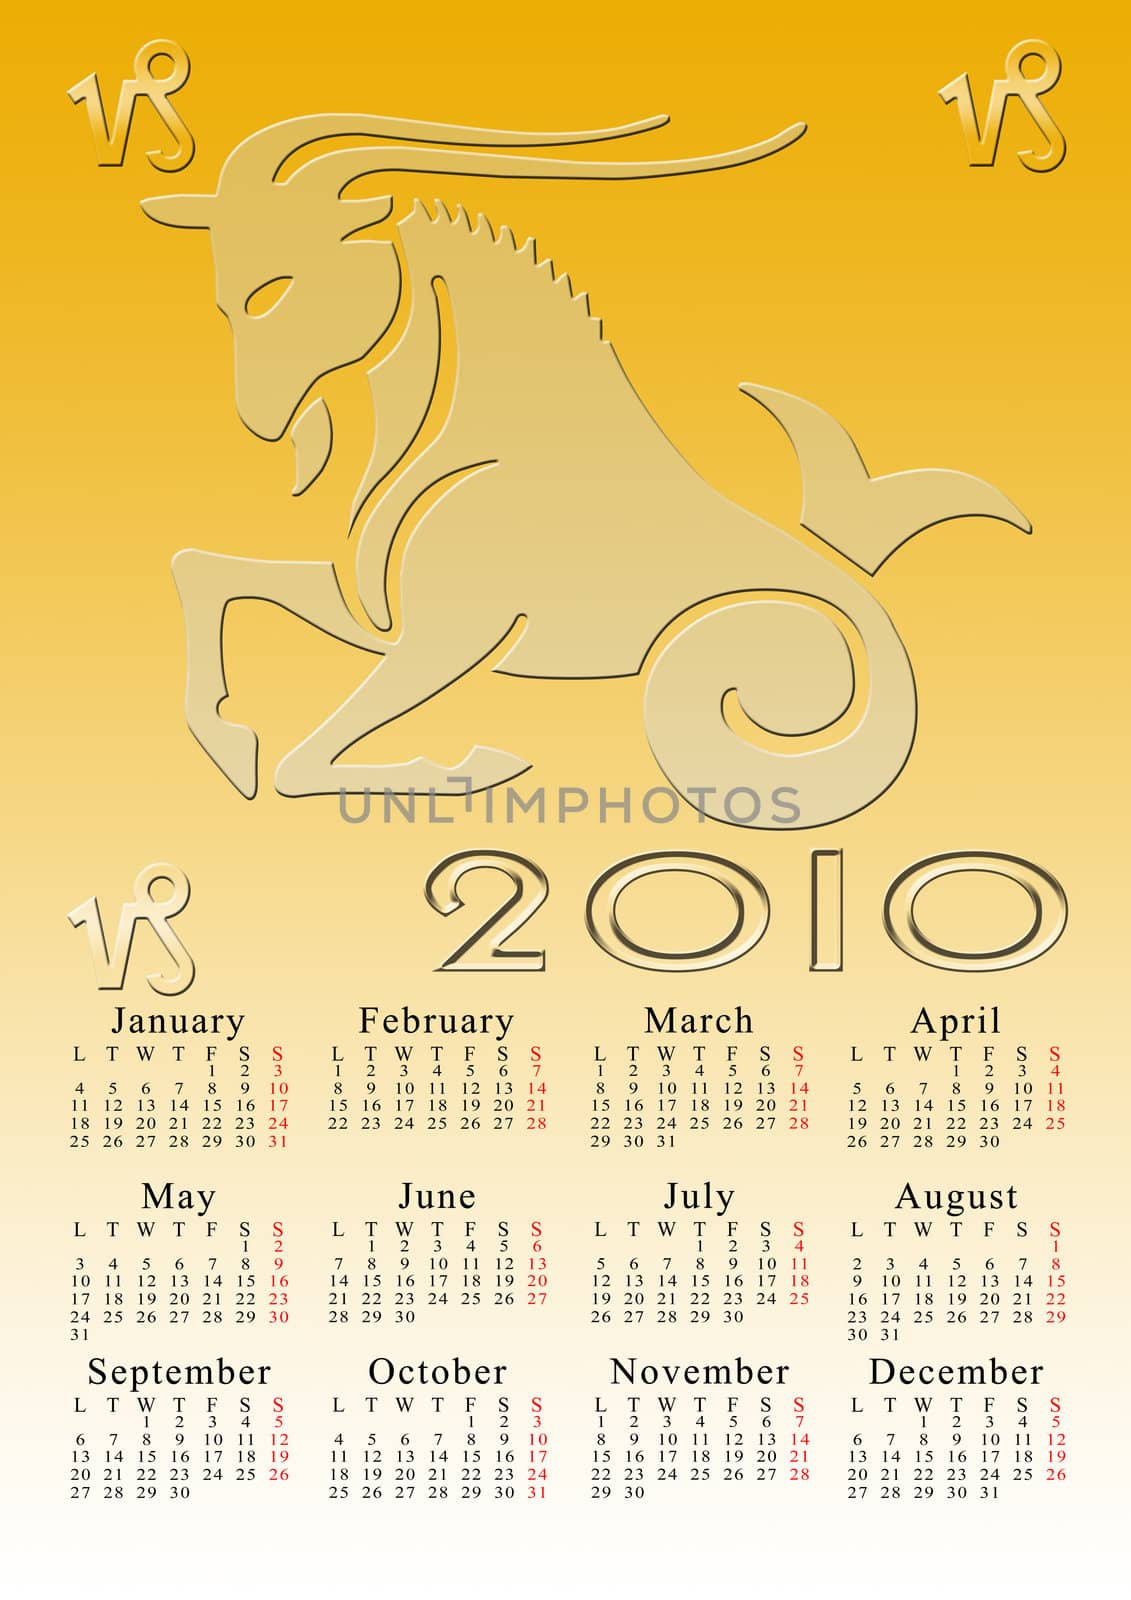 capricorn. calendar for the year 2010 with the astrological sign
